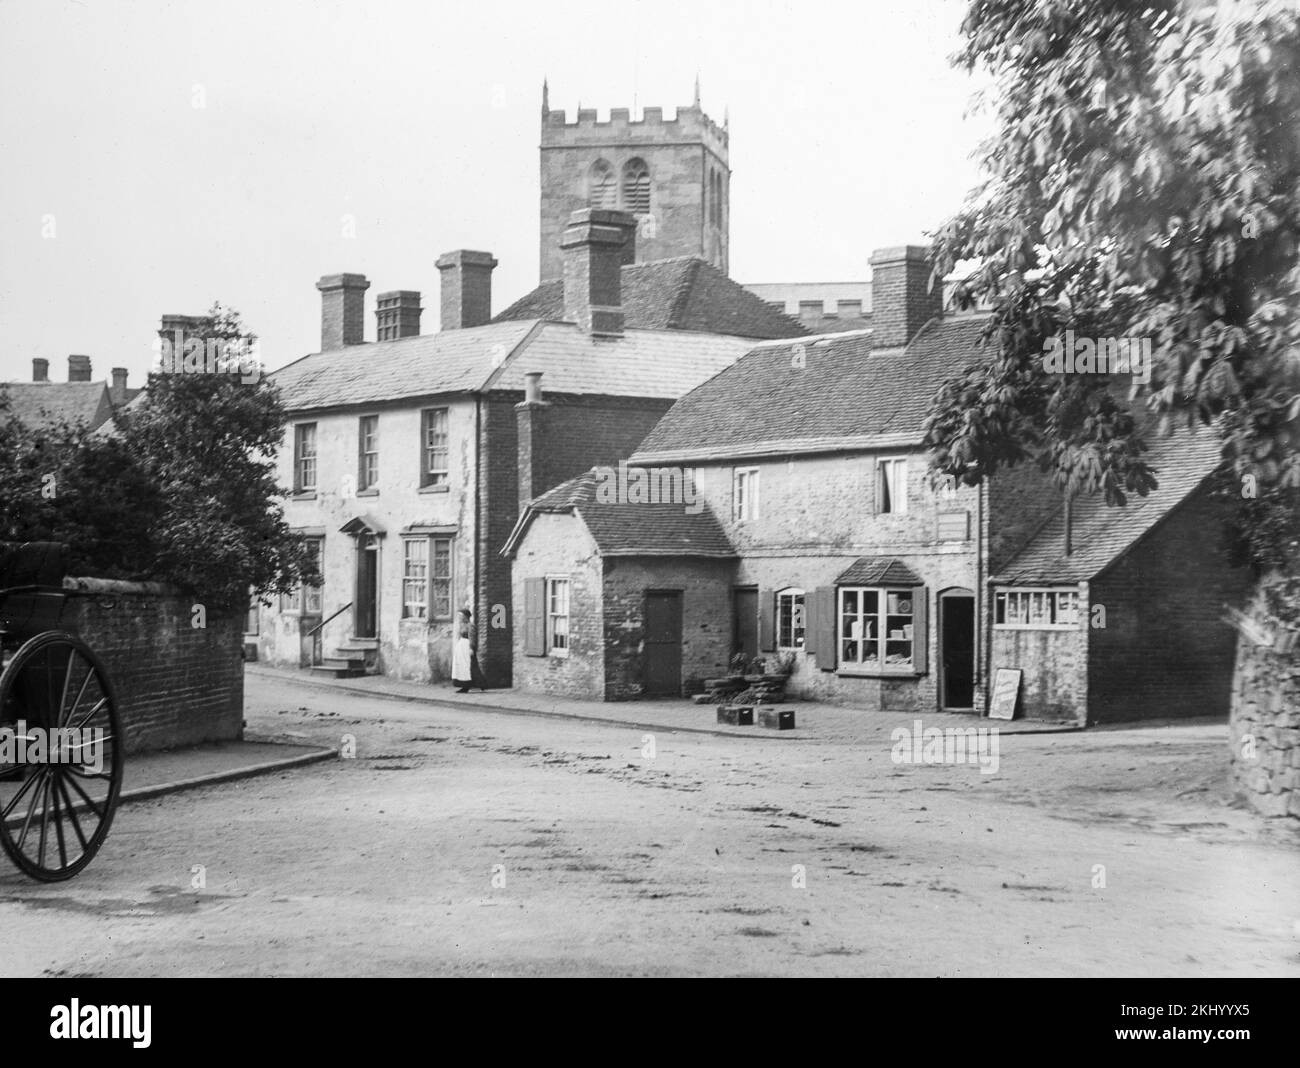 A late 19th century black and white photograph showing a rural English village with its shop and church. Stock Photo